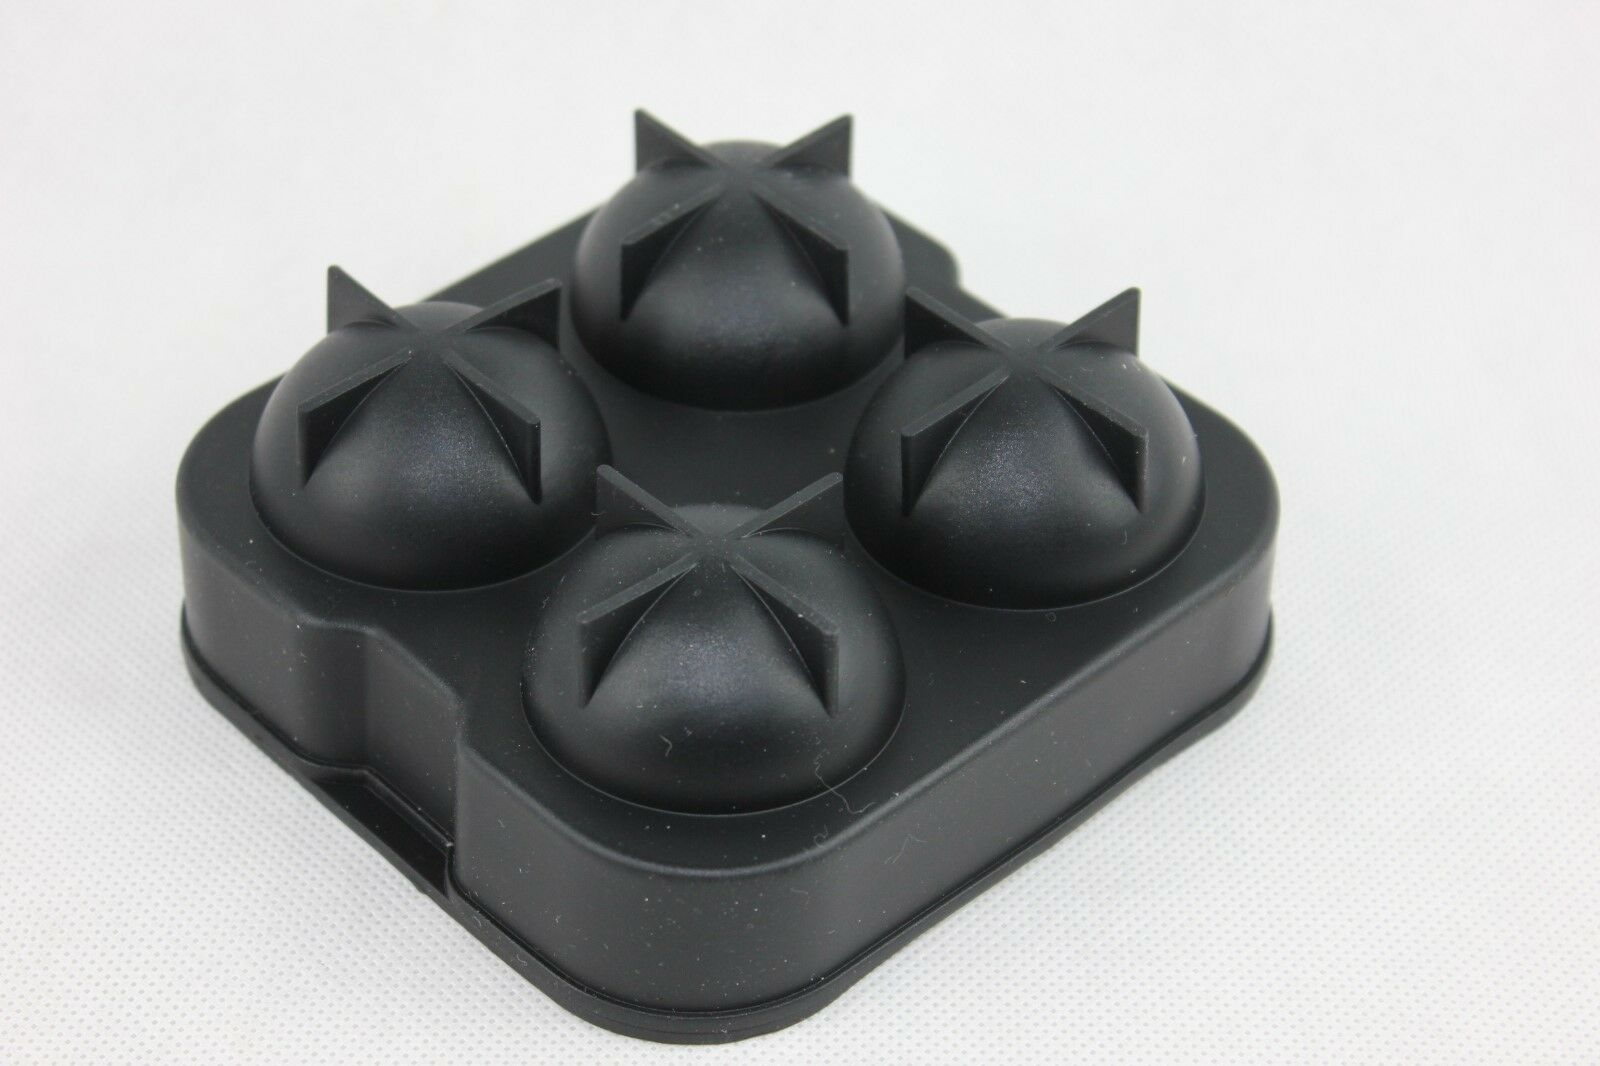 attachment-https://www.cupcakeaddicts.co.uk/wp-content/uploads/imported/6/Large-Round-Ice-Cube-4-Whiskey-Ball-Silicone-Mould-Tray-Sphere-Paperweight-Craft-323163039456-6.jpg